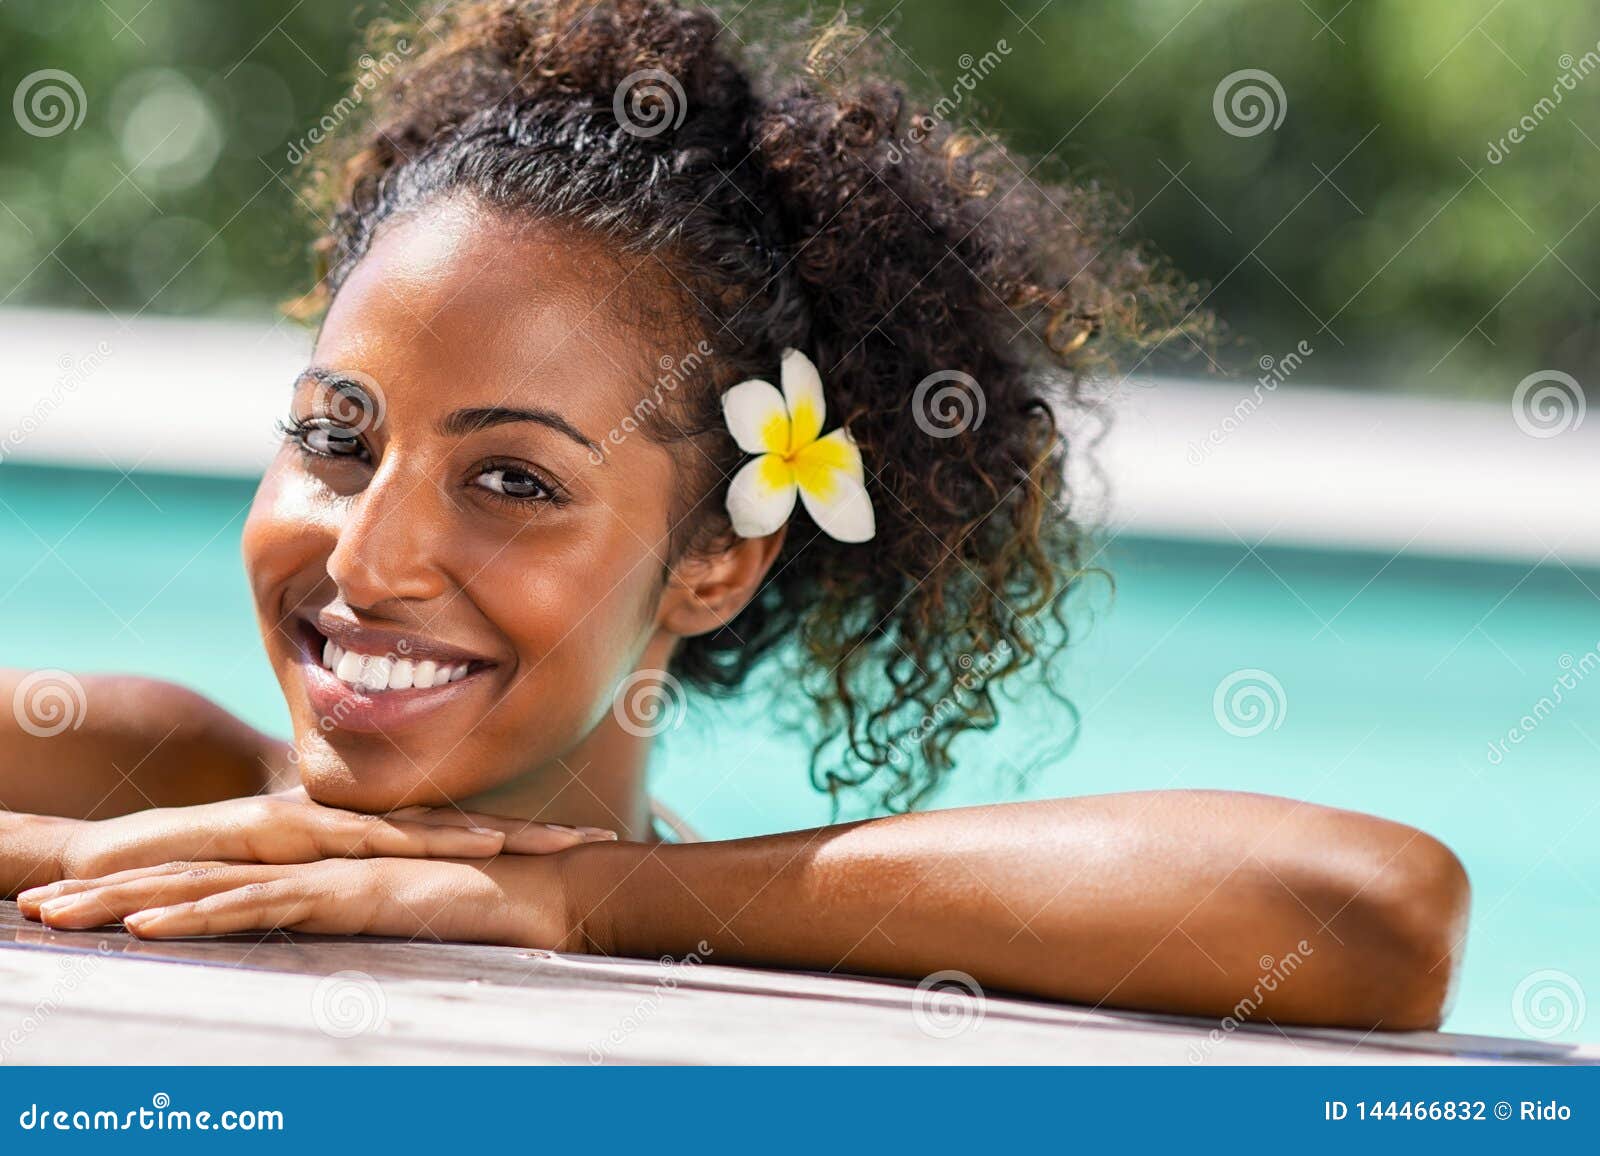 Black Beauty Woman in Swimming Pool Smiling Stock Photo - Image of summer,  happy: 144466832